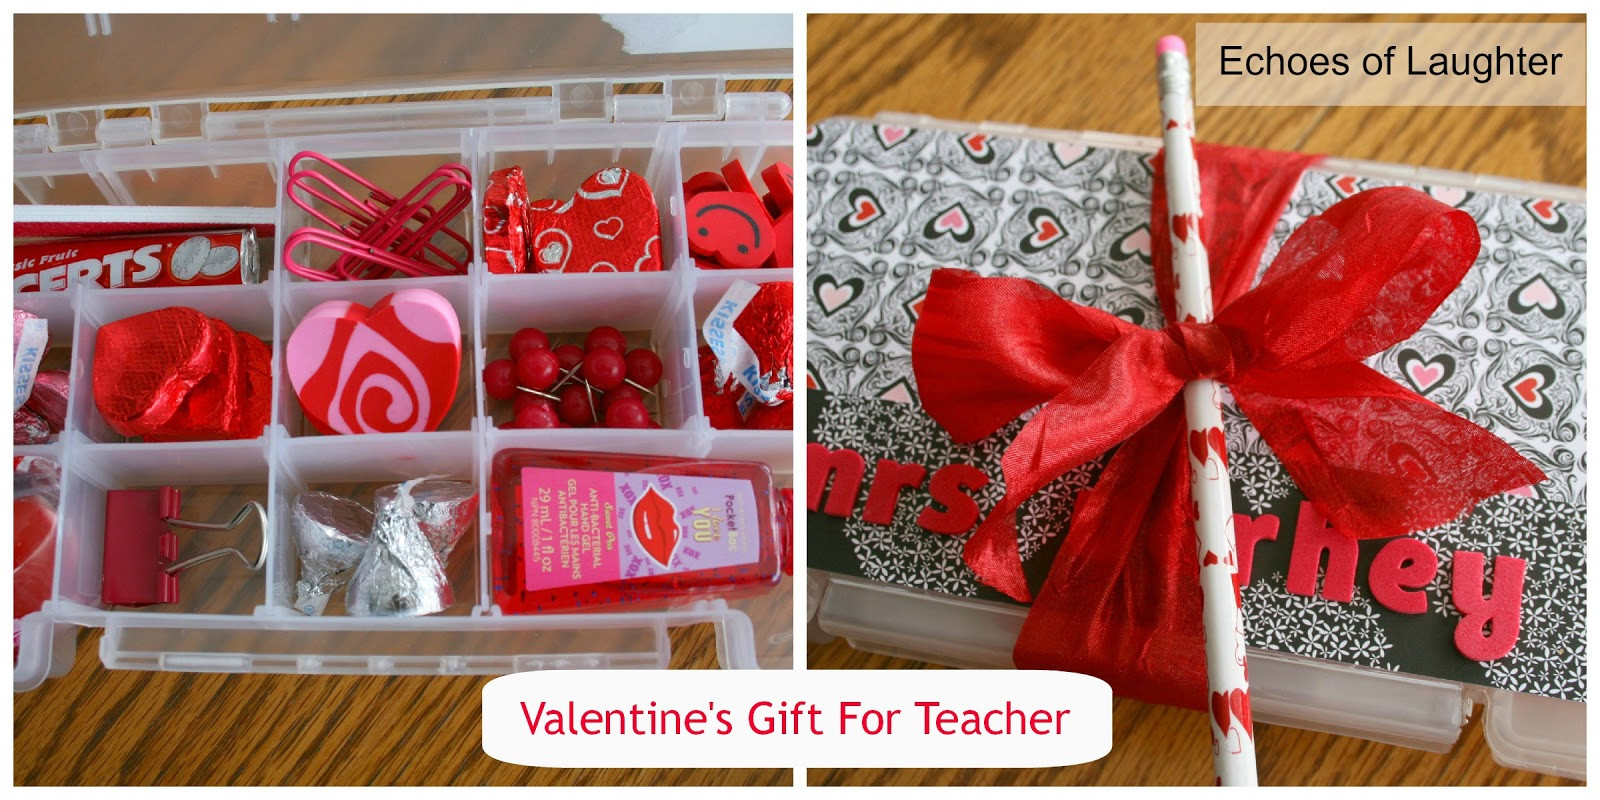 Valentine Day Gift Ideas For Teachers
 10 Inspiring Valentine s Ideas Echoes of Laughter